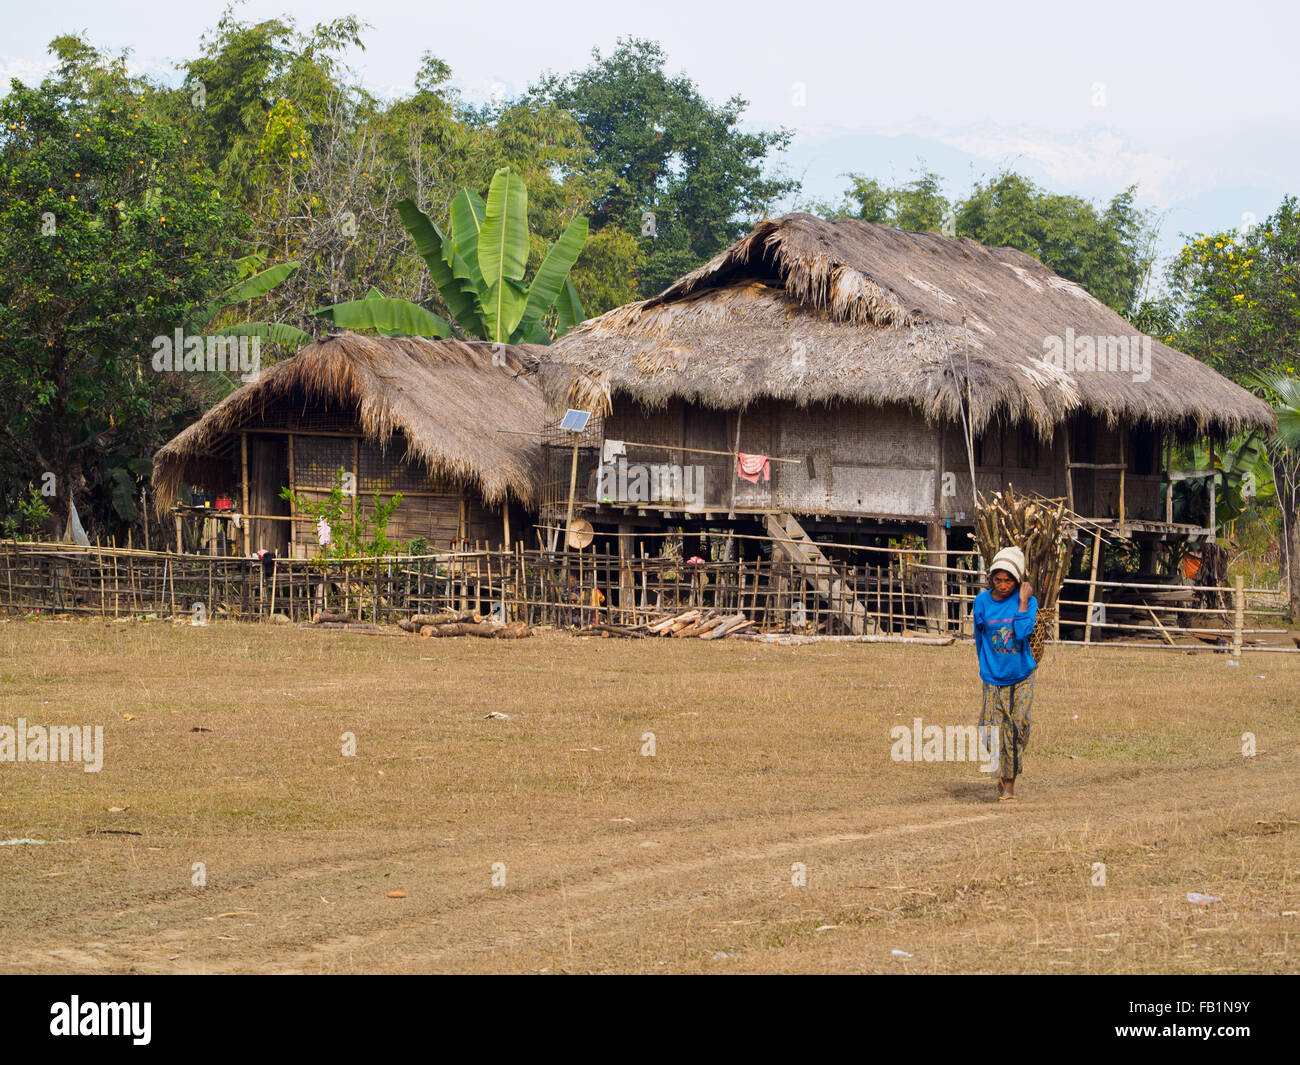 A villager carries firewood from the forest in Northern Myanmar Stock Photo